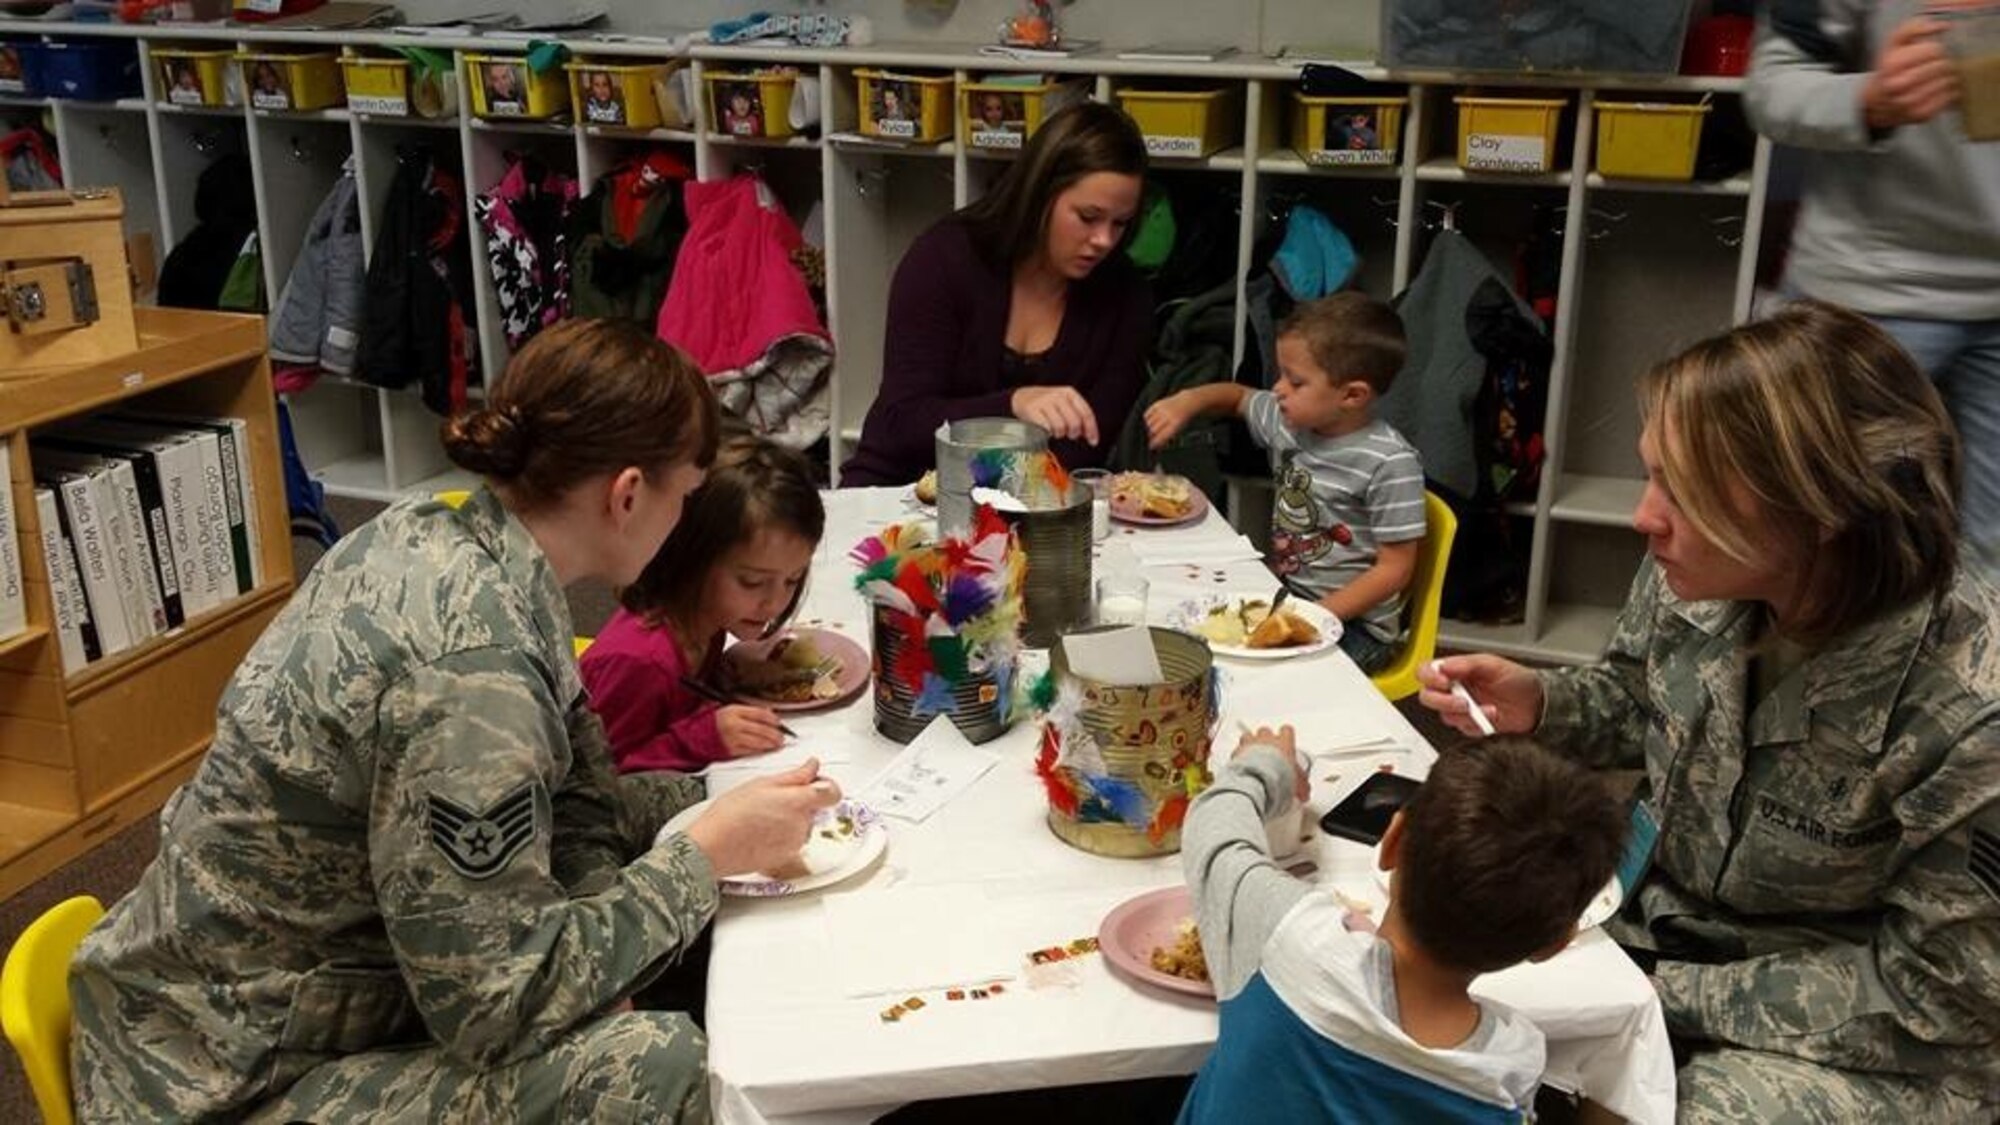 Staff Sgt. Shannon Olson, left, 28th Bomb Wing chaplain assistant, spends time with children in the Youth Center at Ellsworth Air Force Base, S.D., Nov. 19, 2015. Parents were invited to the center for a special event to celebrate Thanksgiving with their children. (Courtesy photo by Staff Sgt. Shannon Olson/Released)